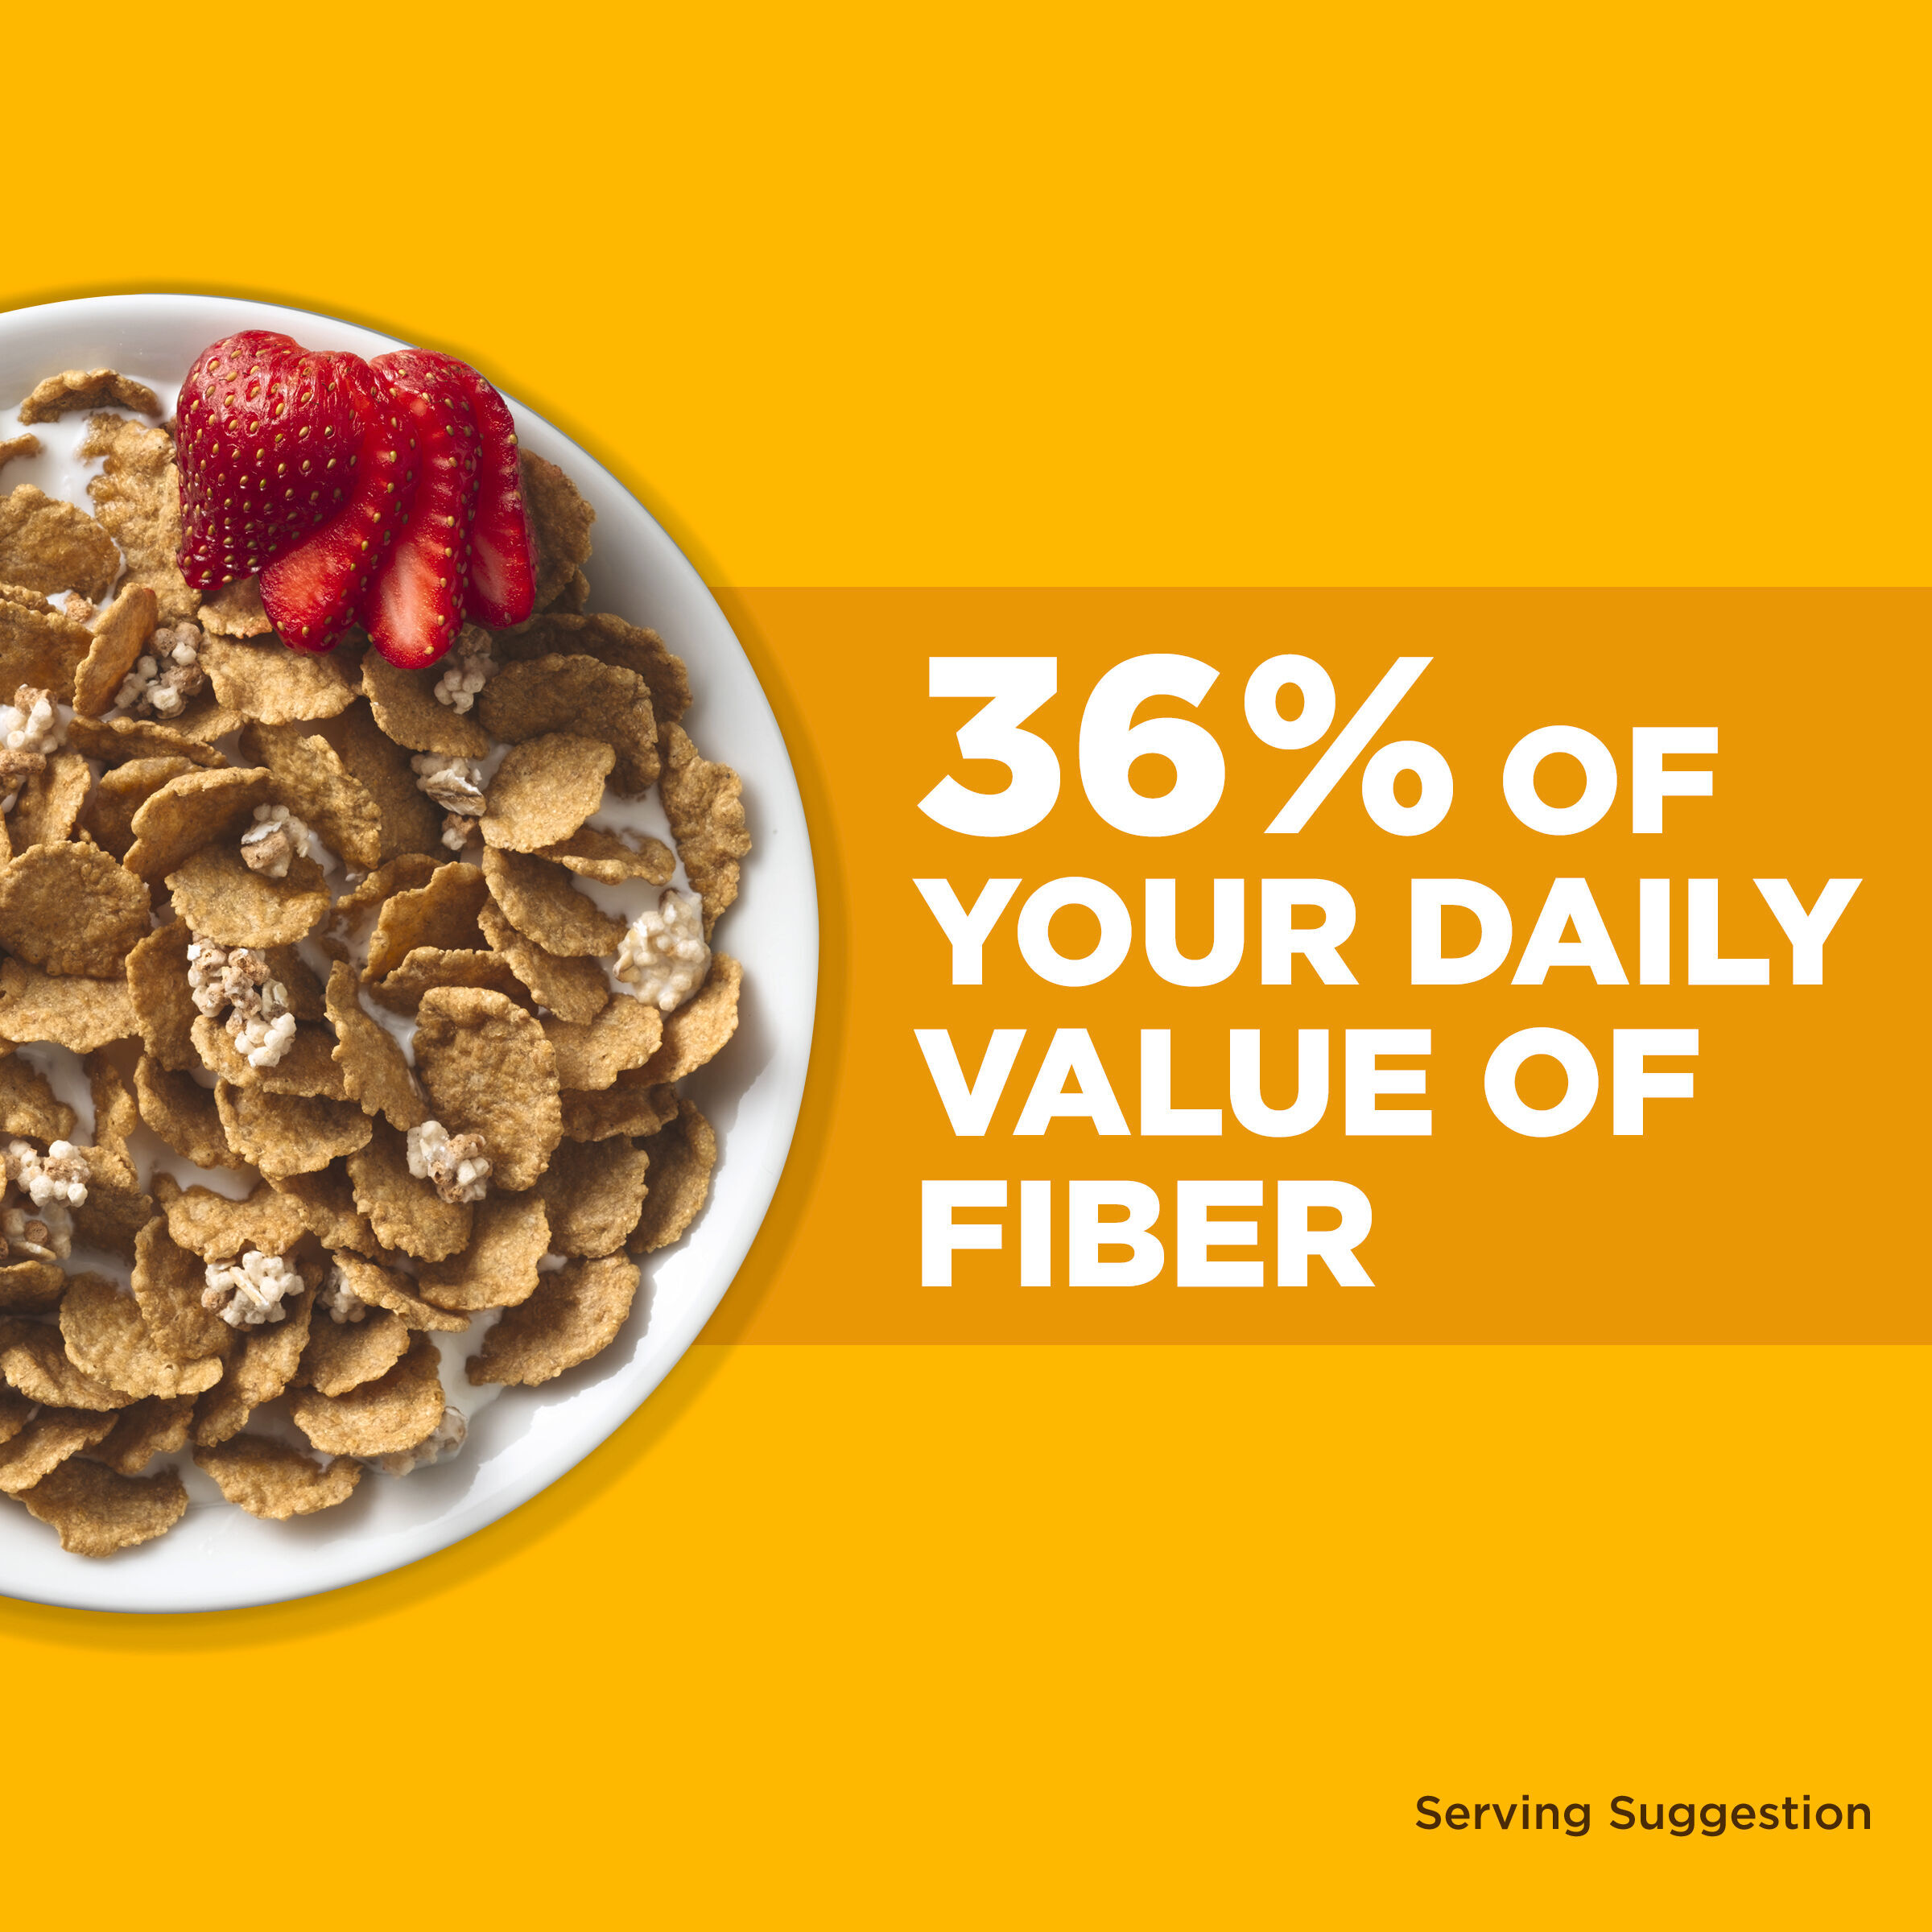 Fiber One Honey Clusters Breakfast Cereal, Fiber Cereal Made with Whole Grain, 17.5 oz - image 3 of 13